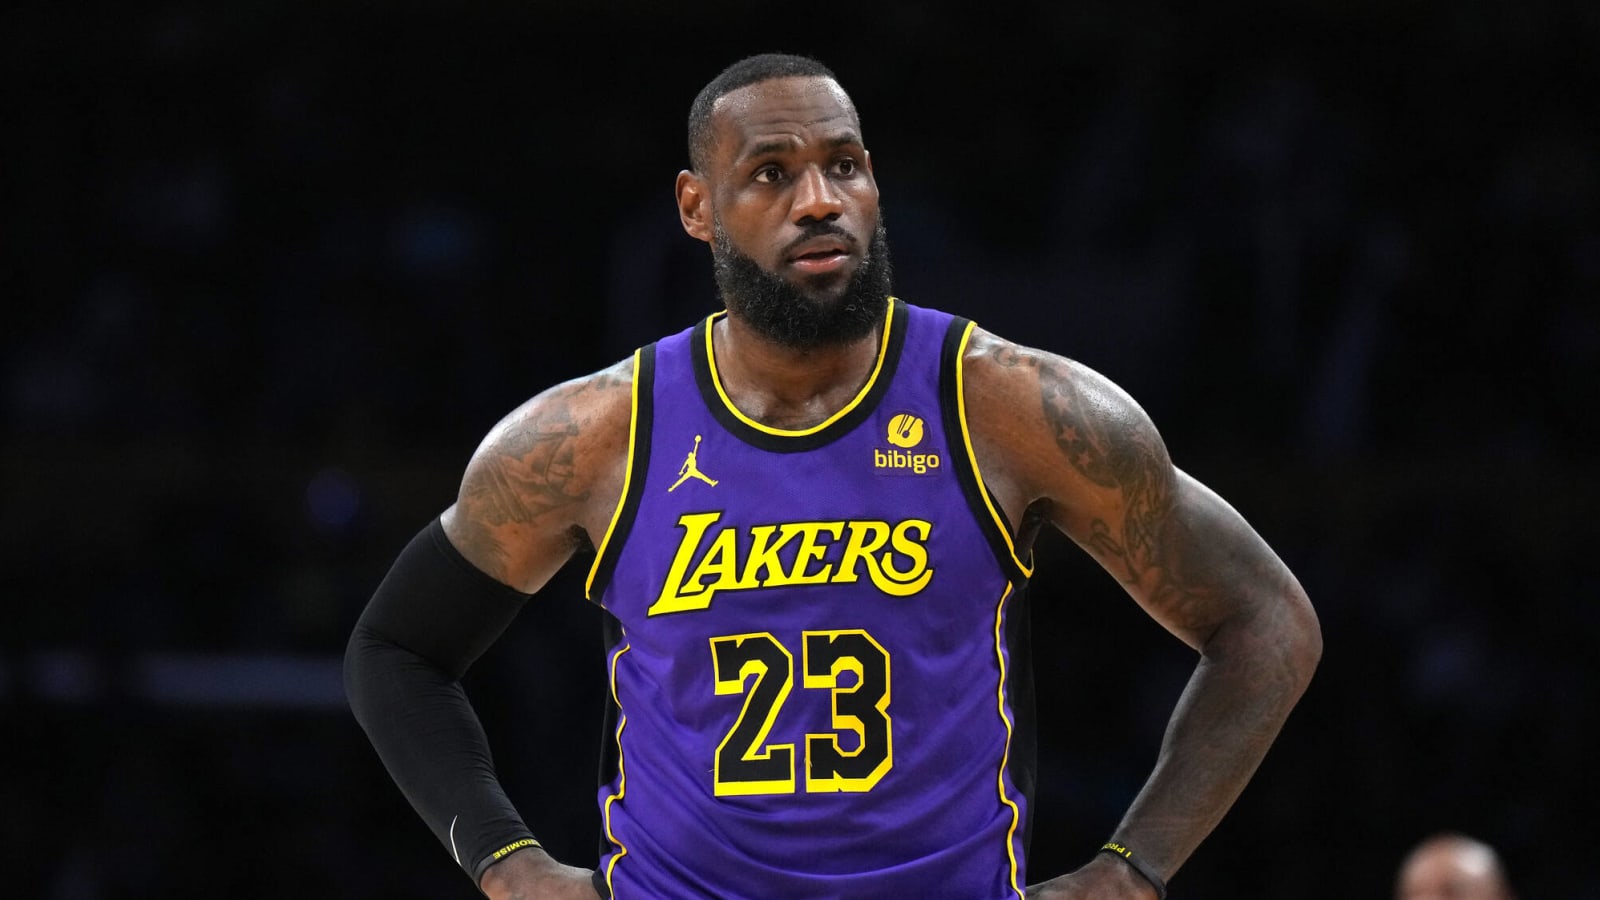 Lakers have not spoken to LeBron James about his plans beyond this season